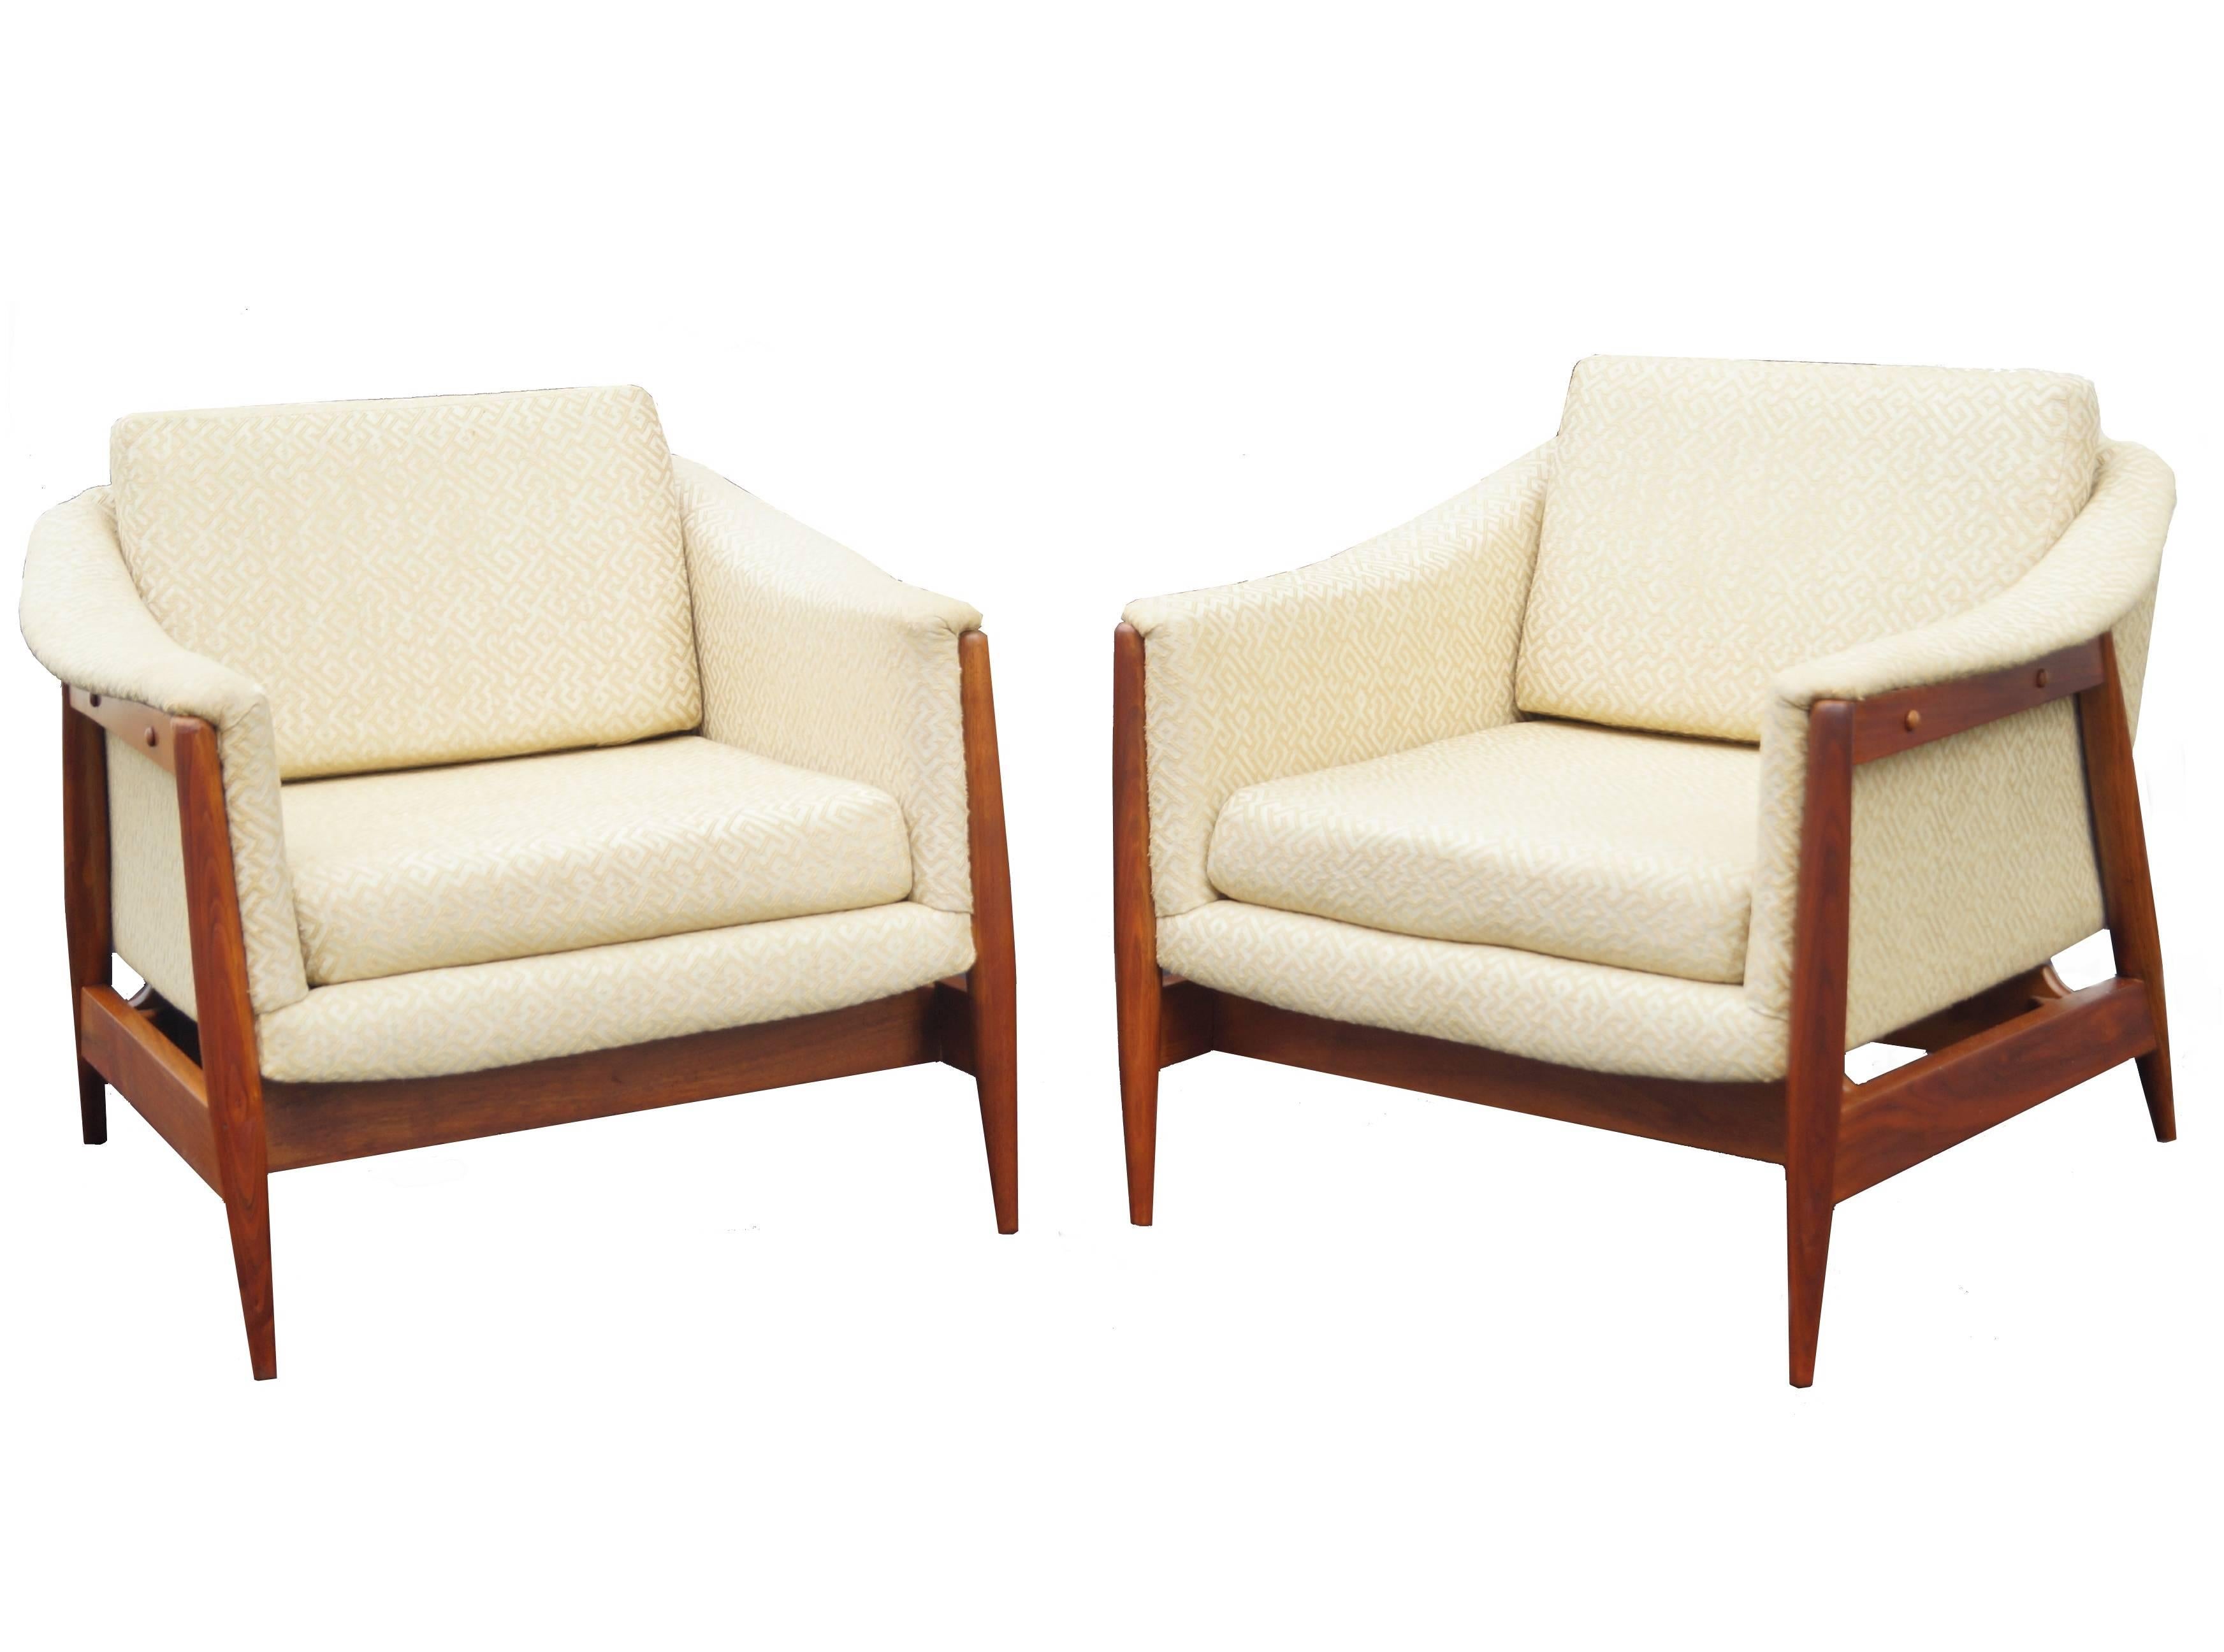 Pair of 1950s DUX style Danish Mid-Century Modern lounge chairs.